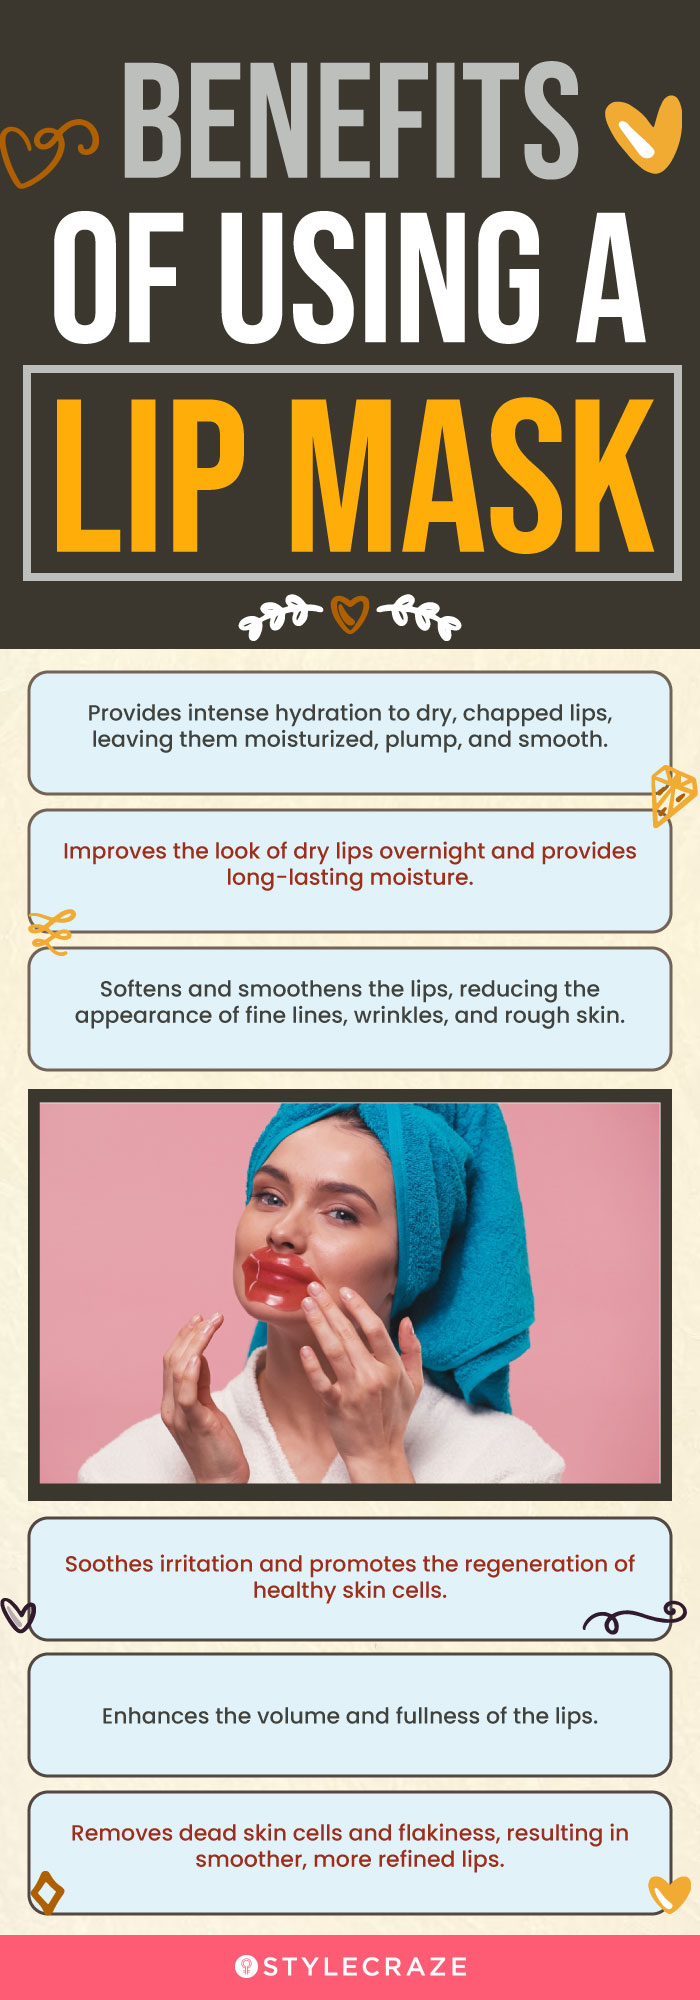 Benefits Of Using A Lip Mask (infographic)